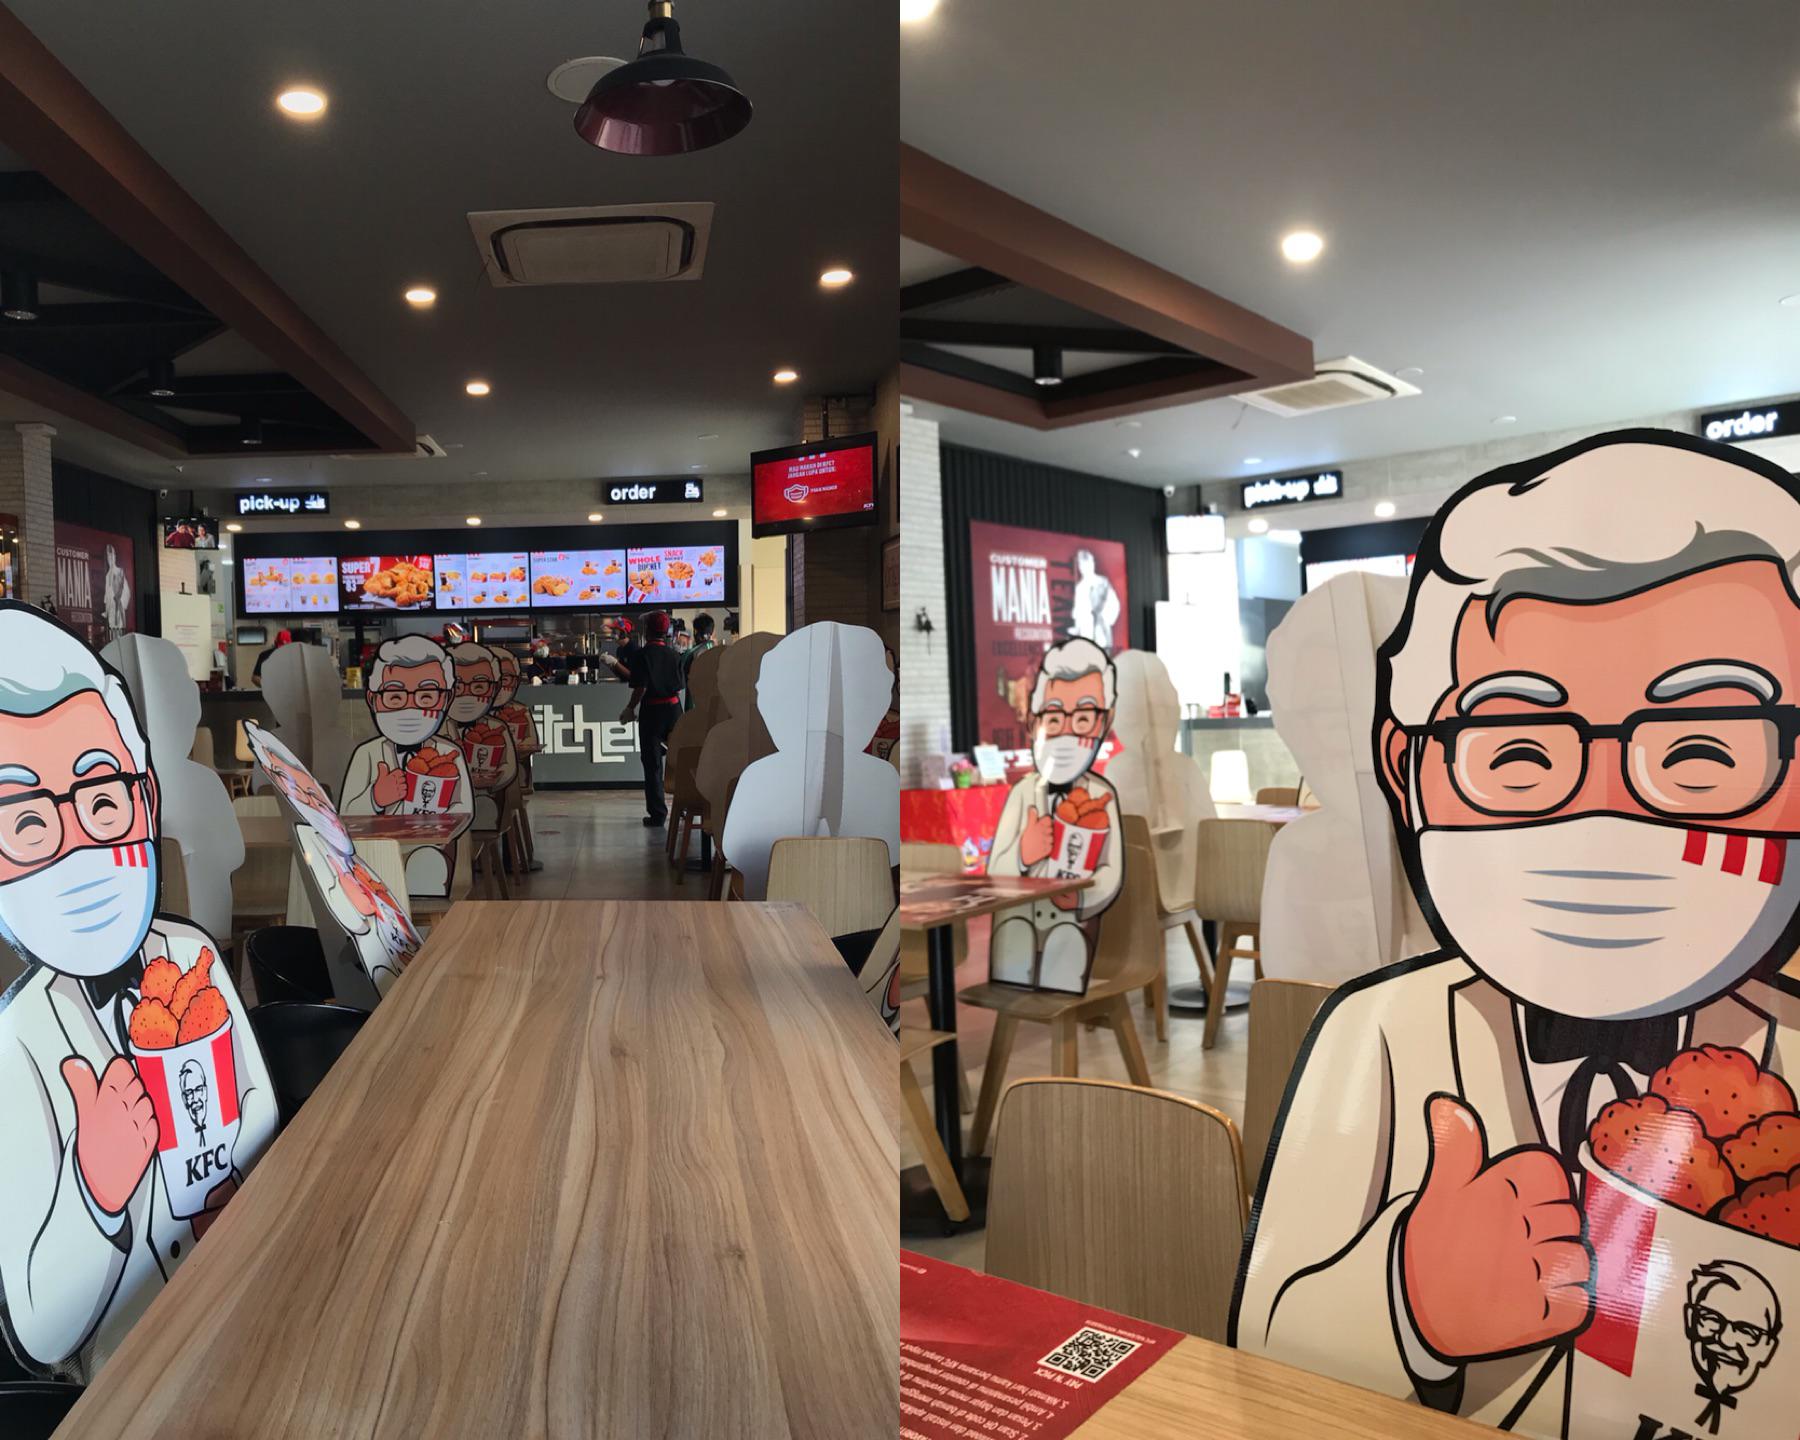 KFC+is+using+the+Colonel+to+enforce+distancing.